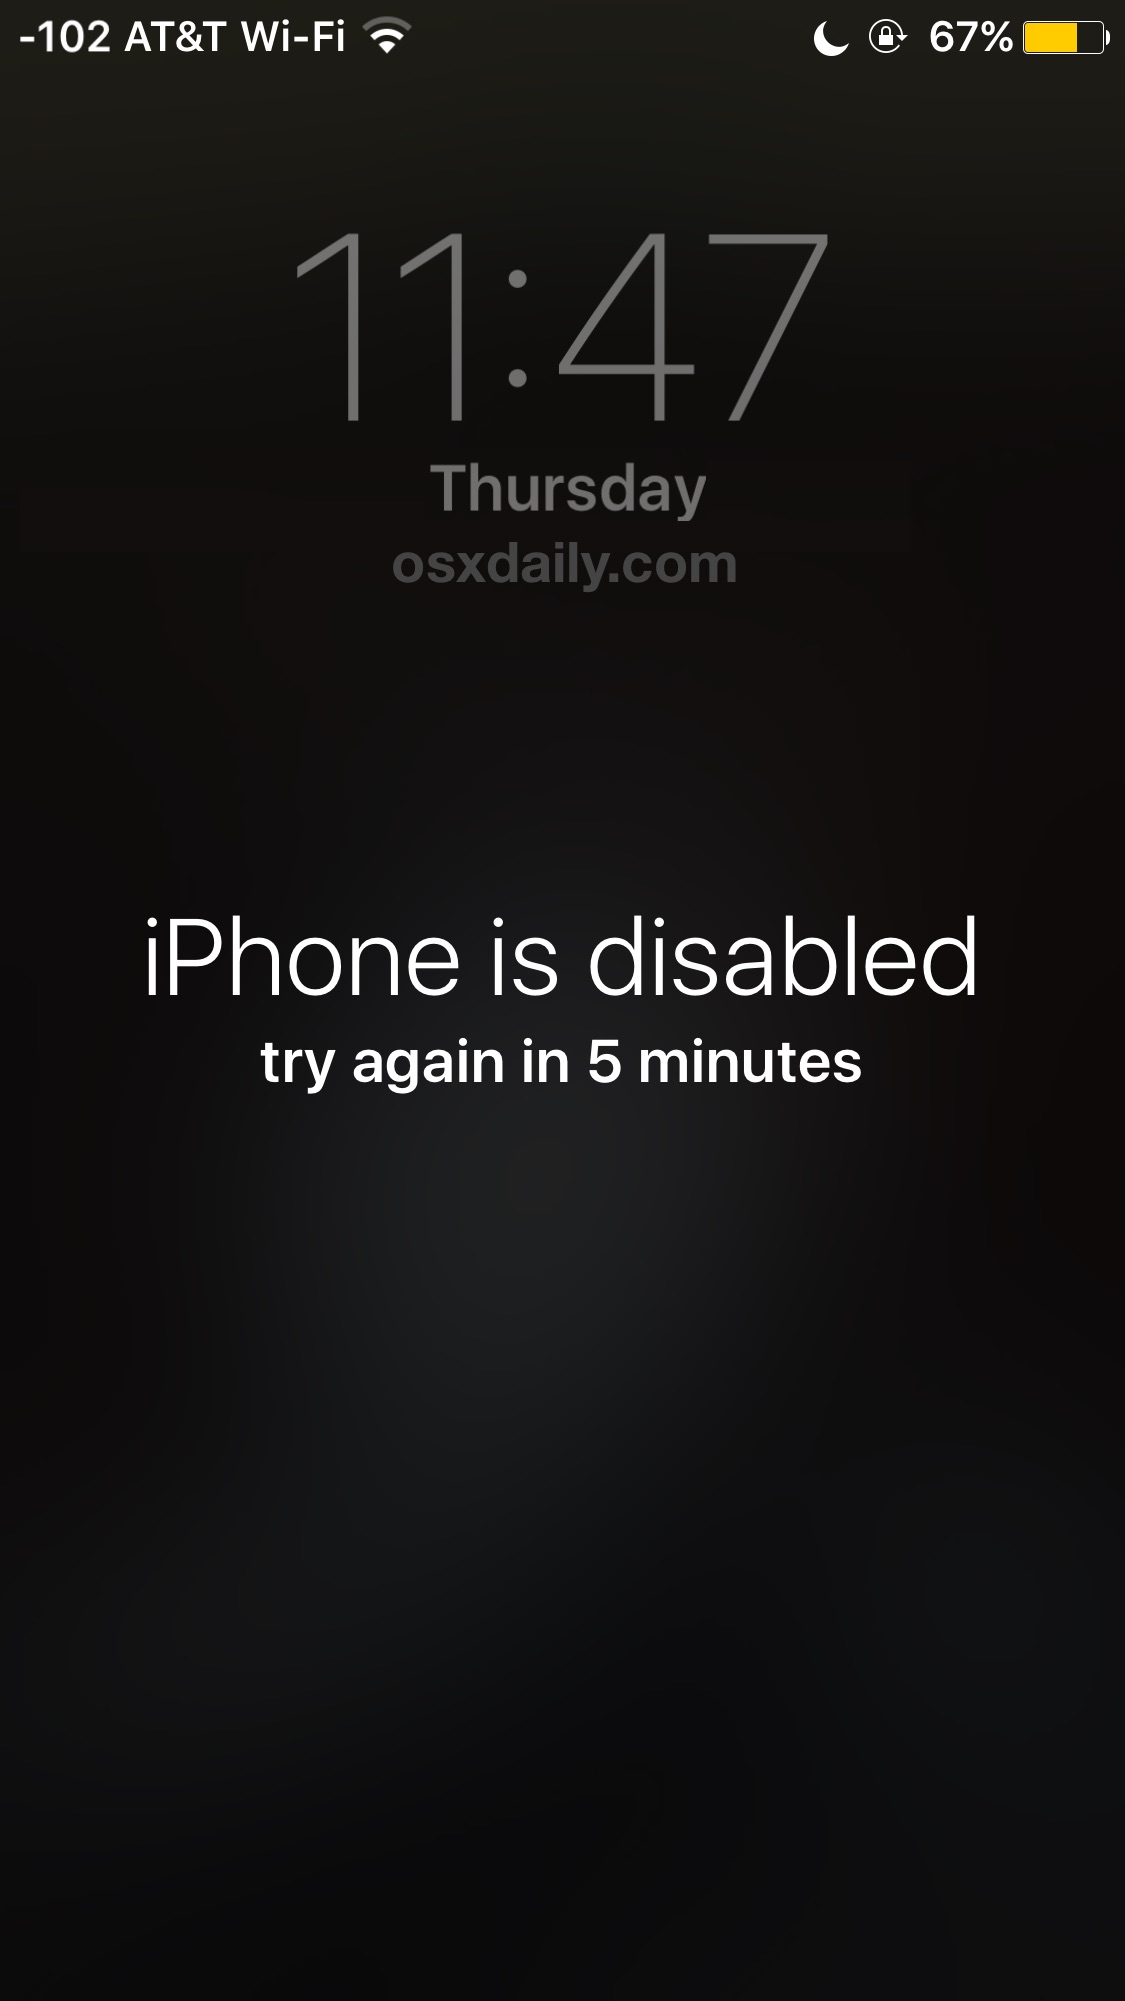 iphone is disabled error message